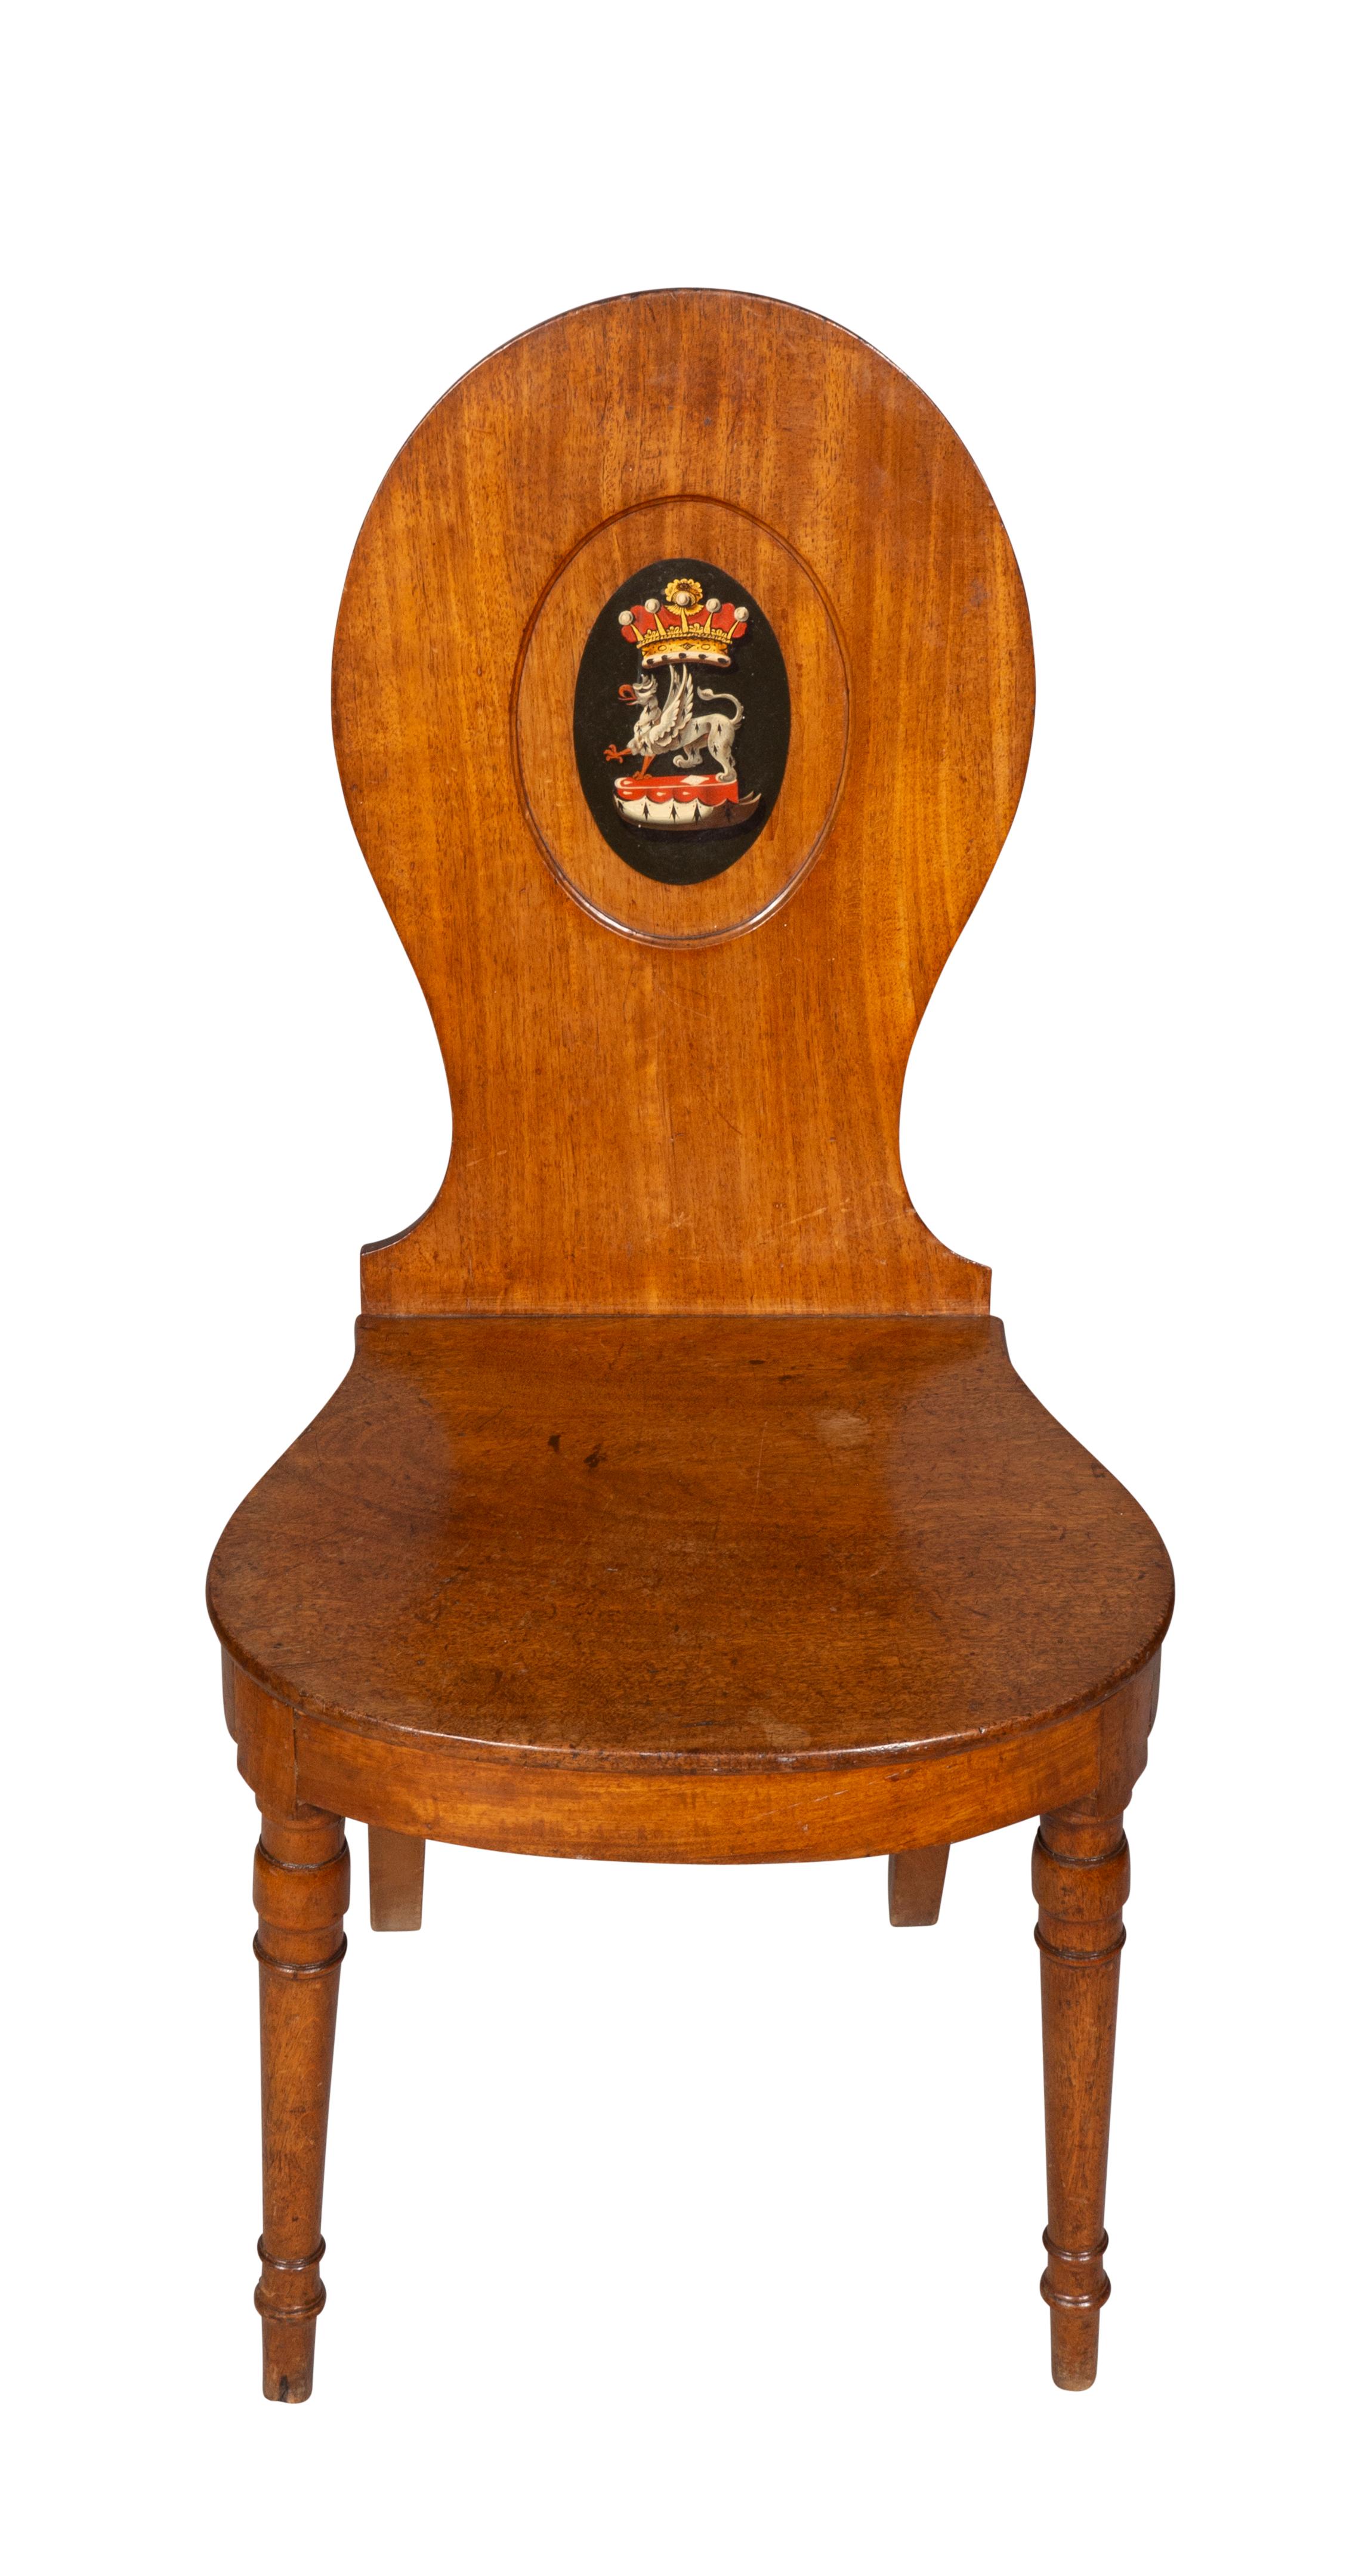 Each with oval backs with centrally painted crest. Bowed seat raised on circular tapered legs.